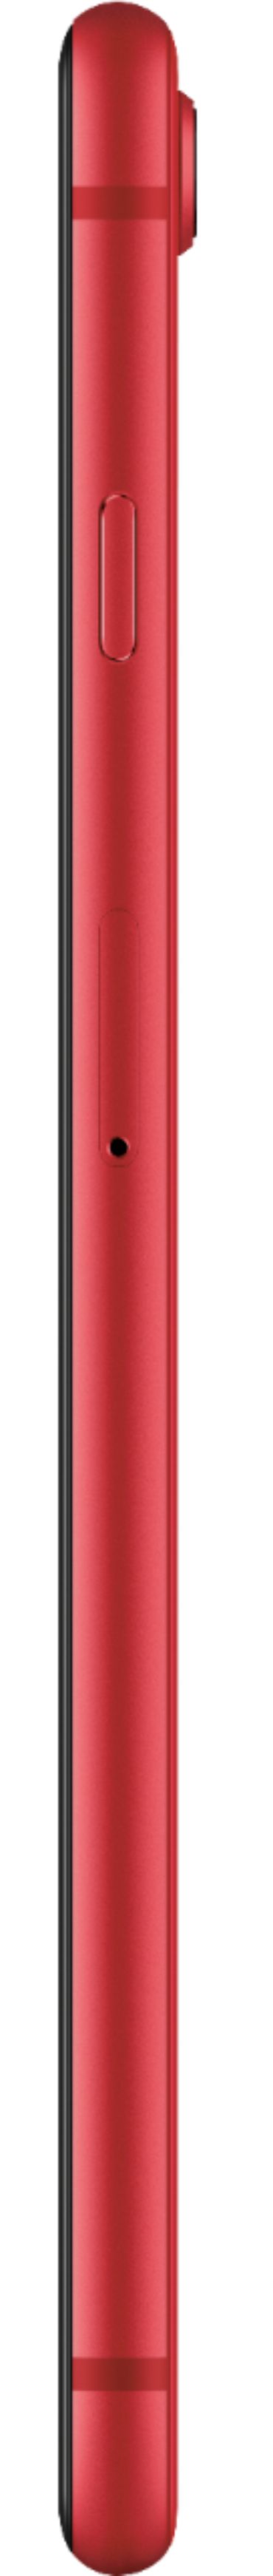 Best Buy: Apple iPhone 8 Plus GB PRODUCTRED™ Special Edition